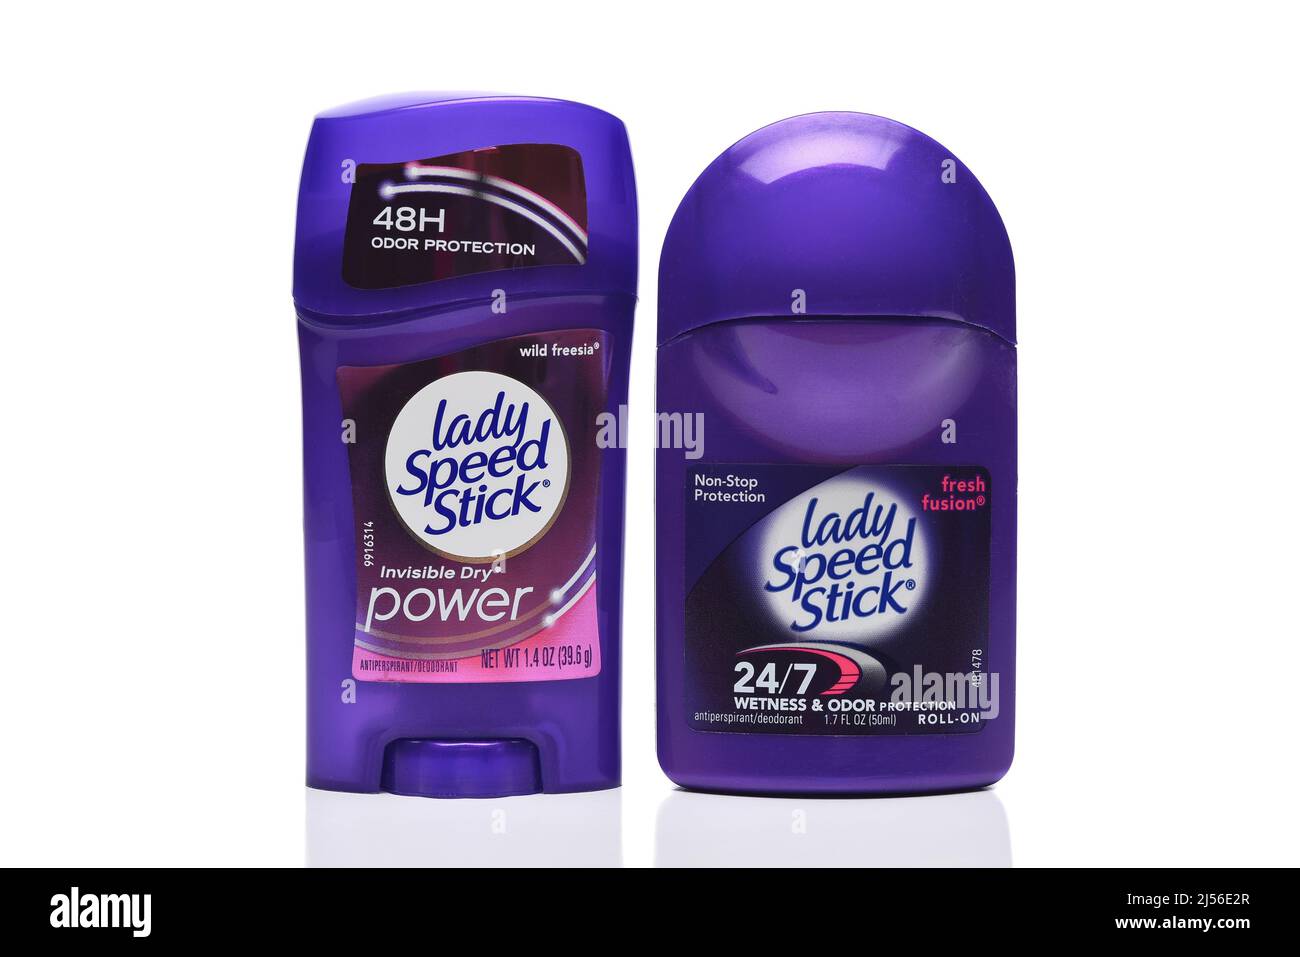 IRVINE, CALIFORNIA - 20 APR 2022: Two different Lady Speed Stick Womens Deodorant and Antiperspirant. Stock Photo